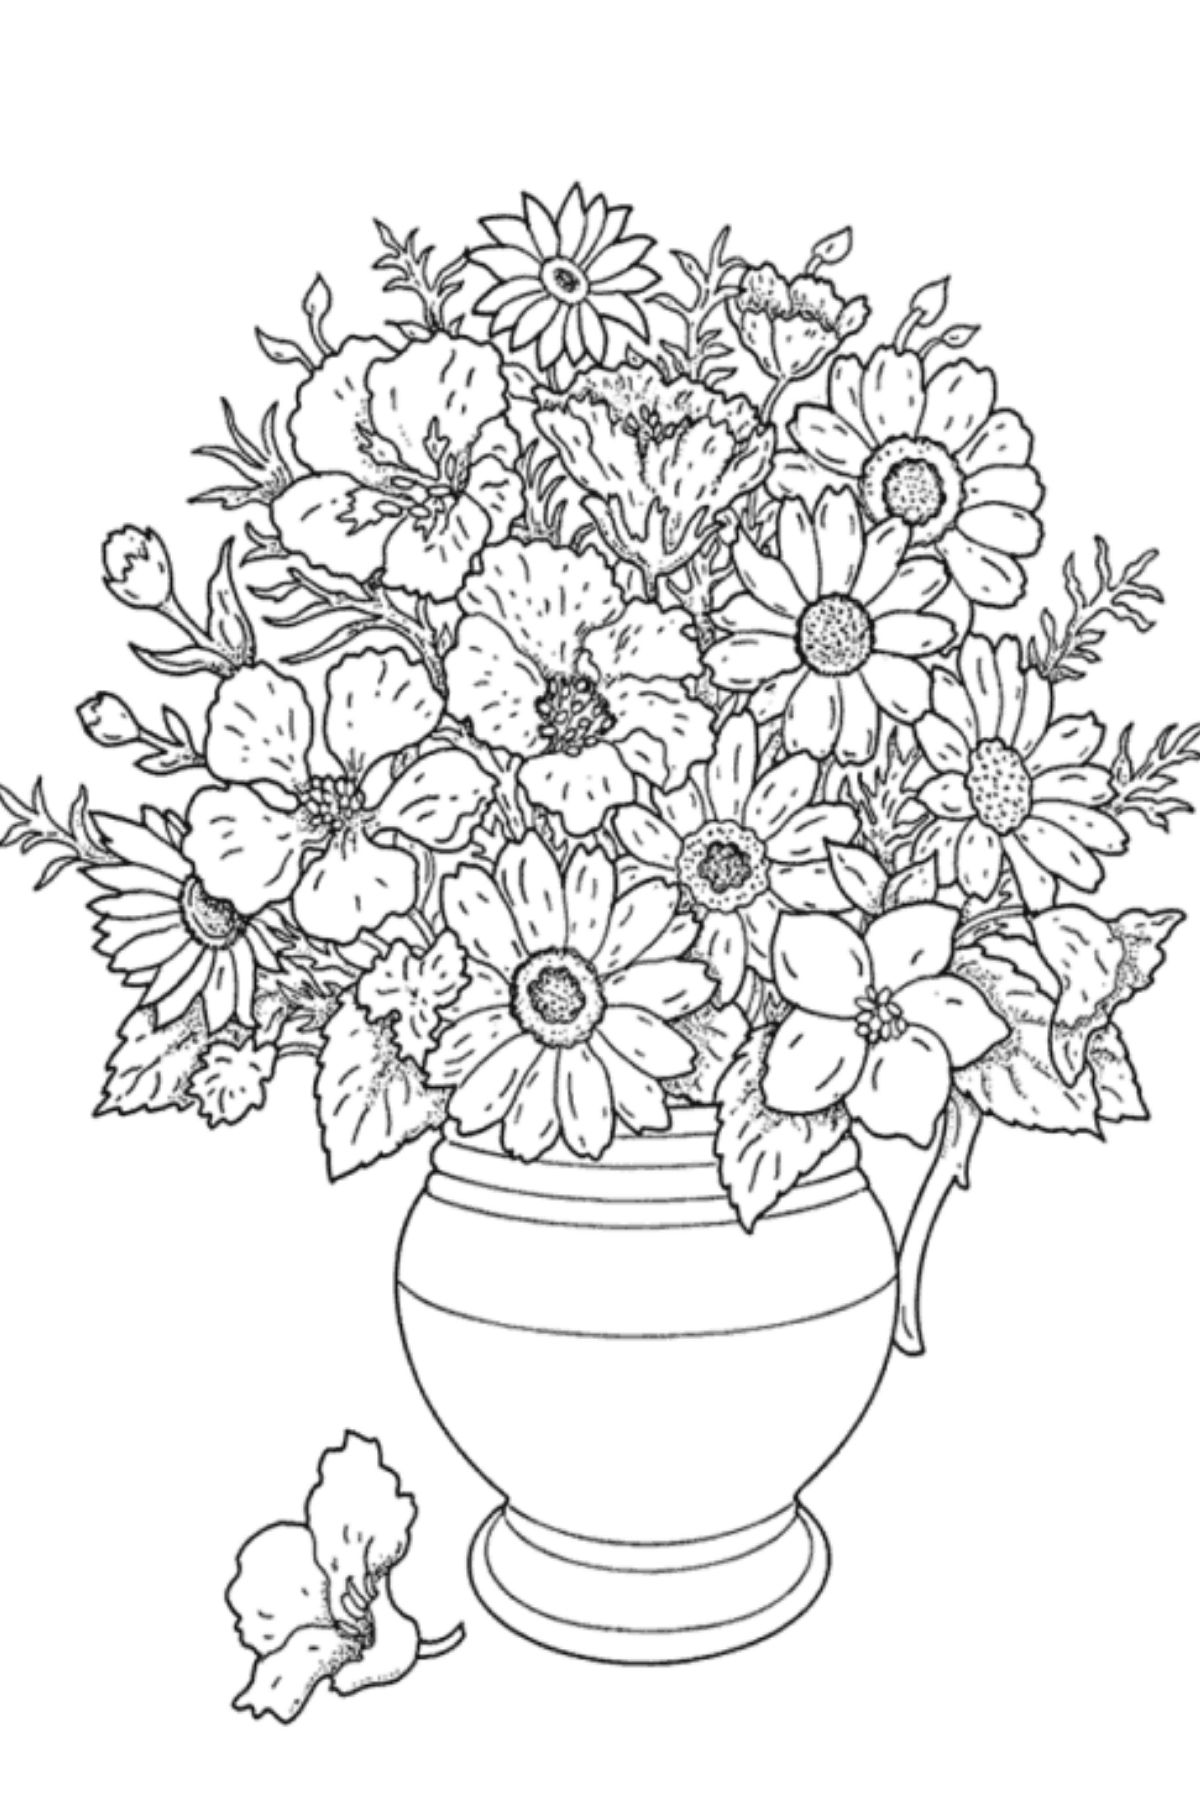 Still life flower vase coloring page for adults.